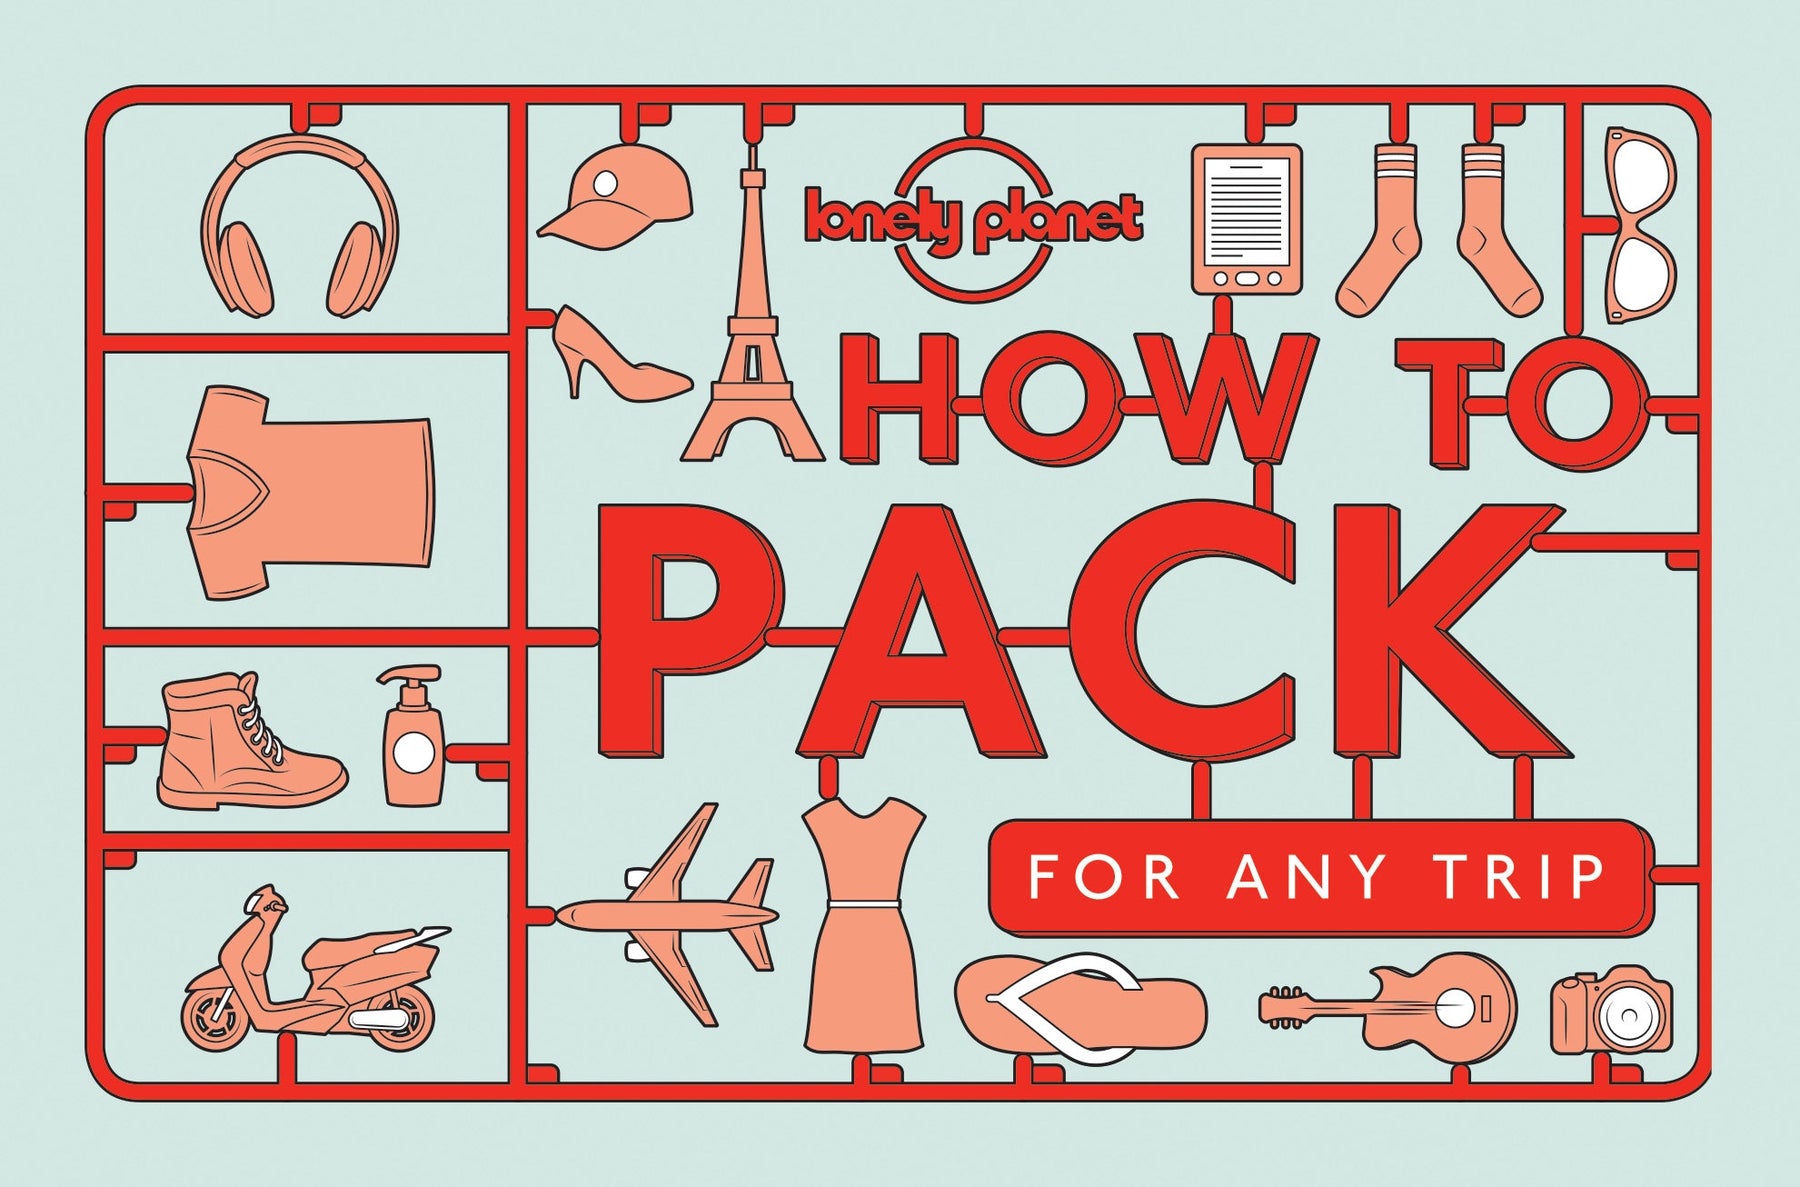 How to Pack for Any Trip - Book + eBook